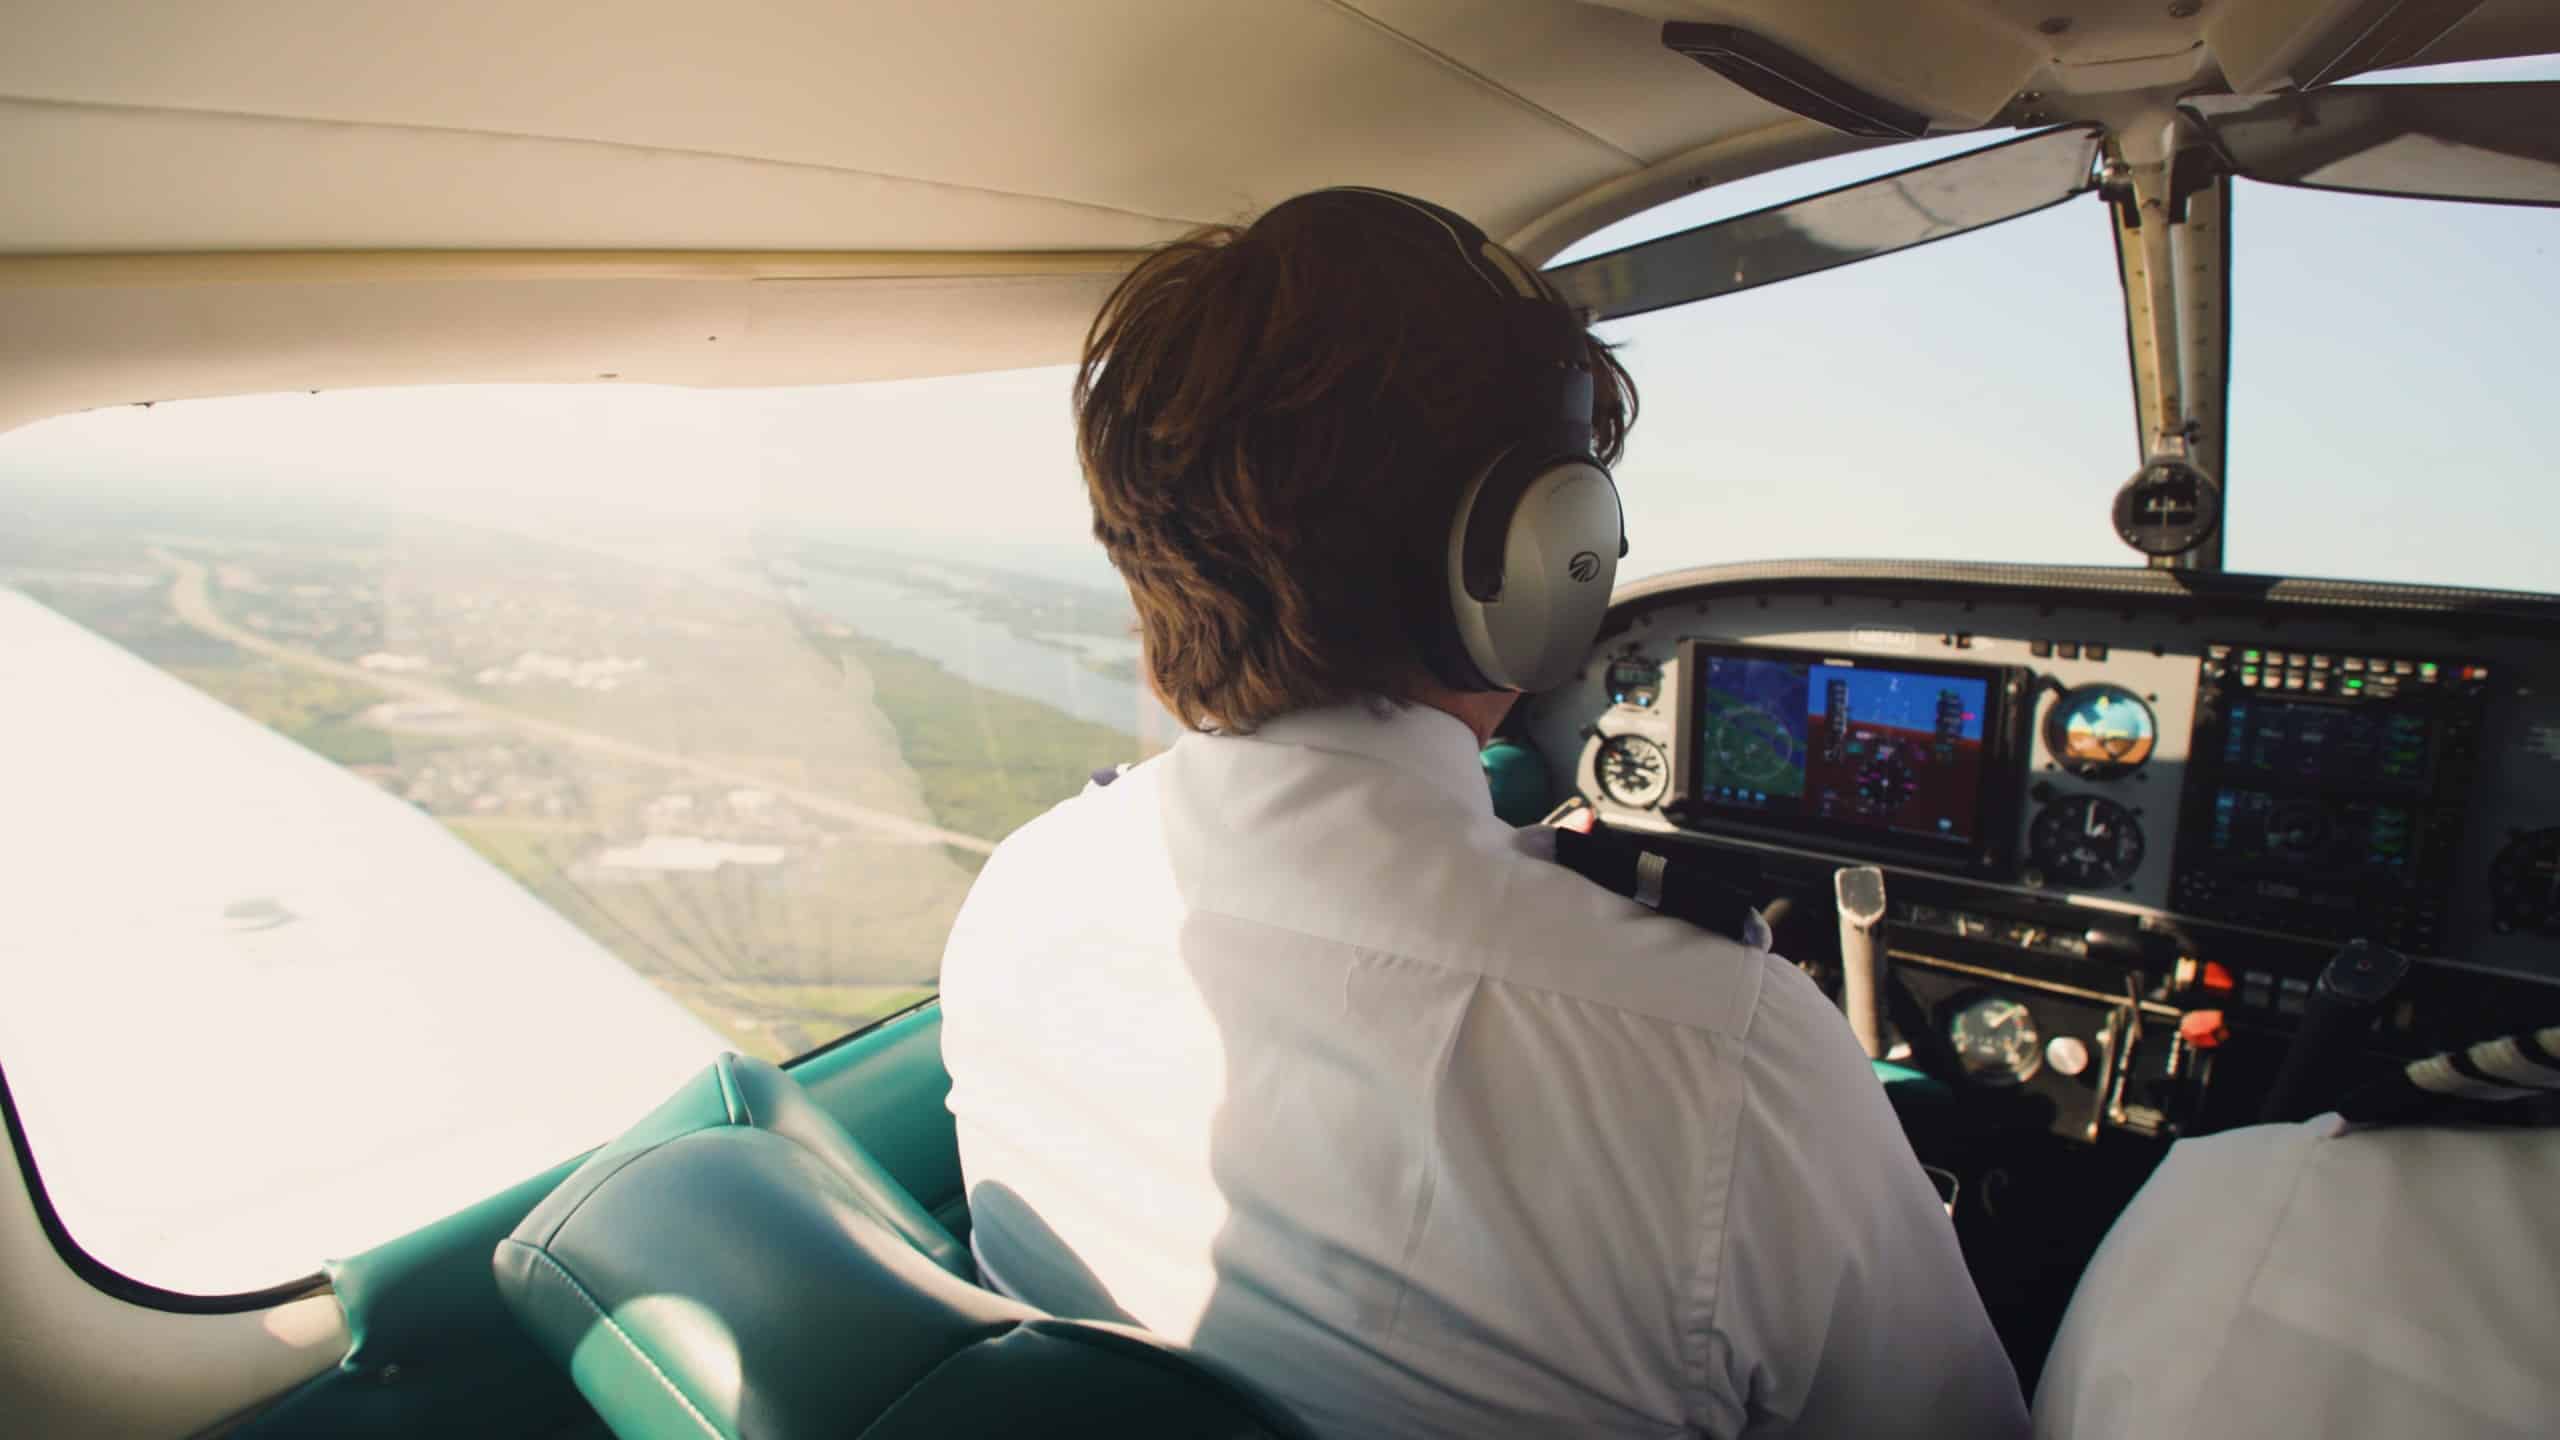 A pilot in the cockpit of a small airplane